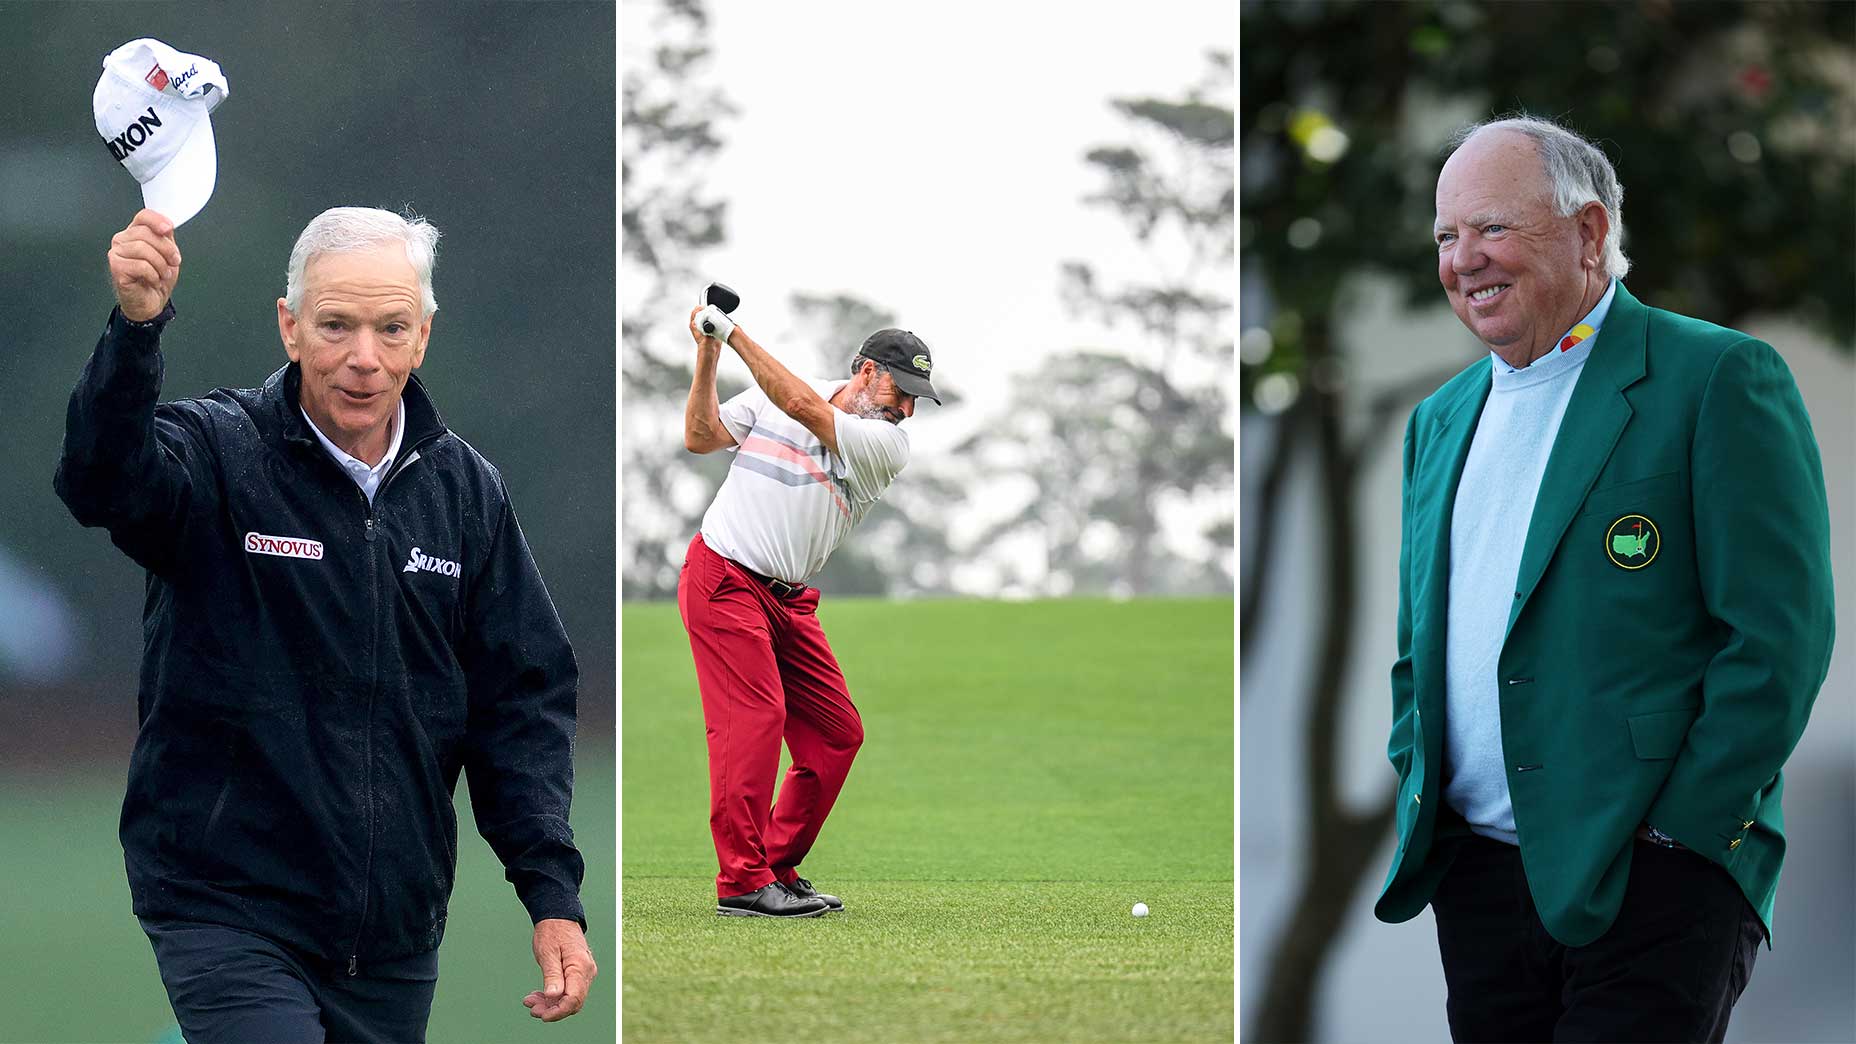 A split image (from L to R) of Larry Mize, Jose Maria Olazabal and Mark O'Meara.